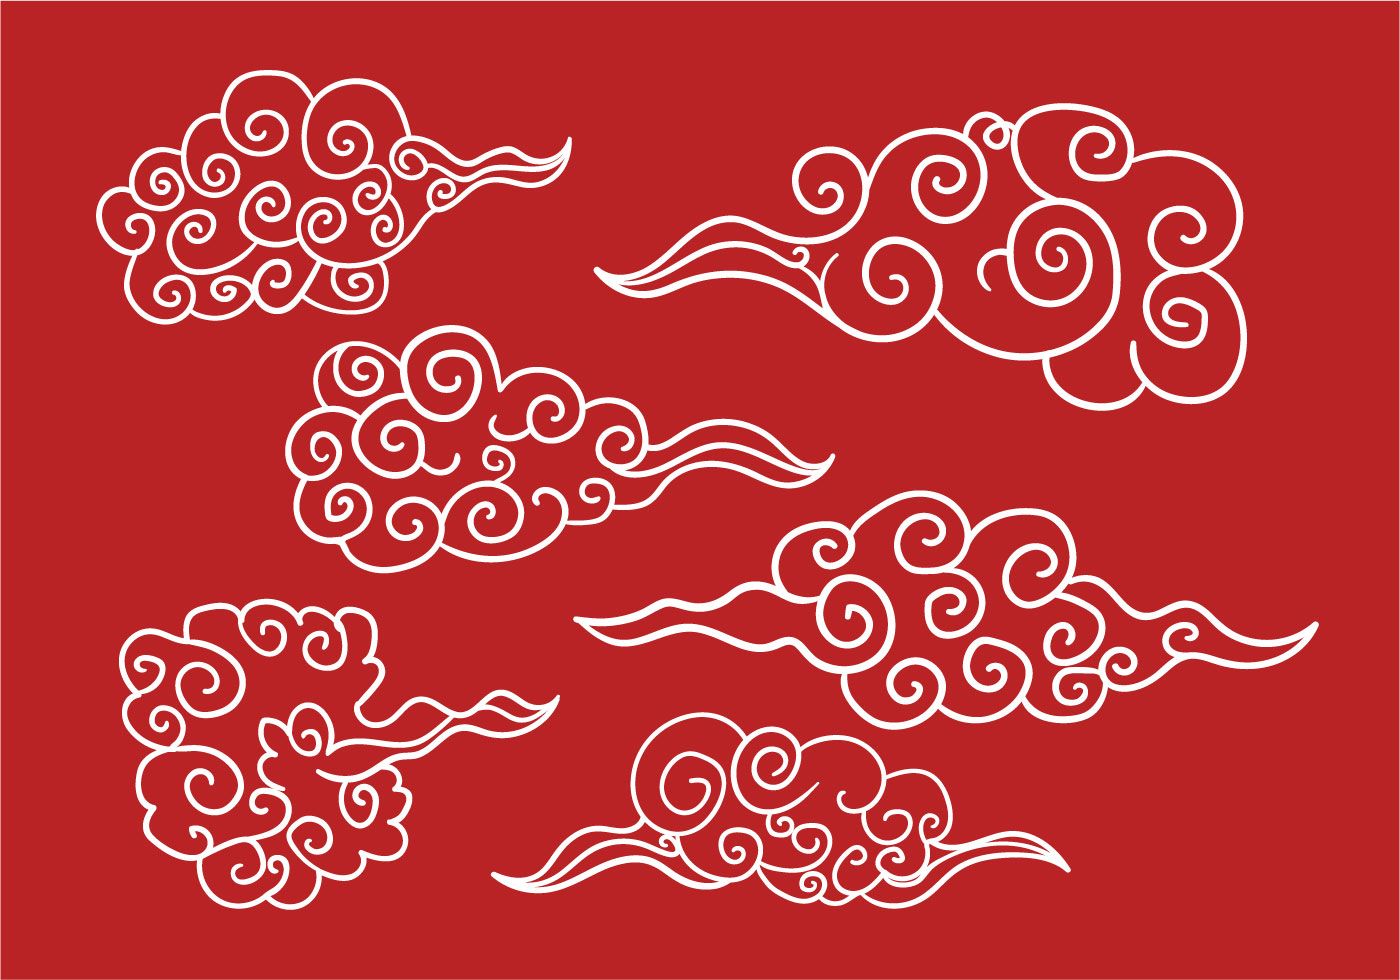 Chinese Clouds Vector in 2019.